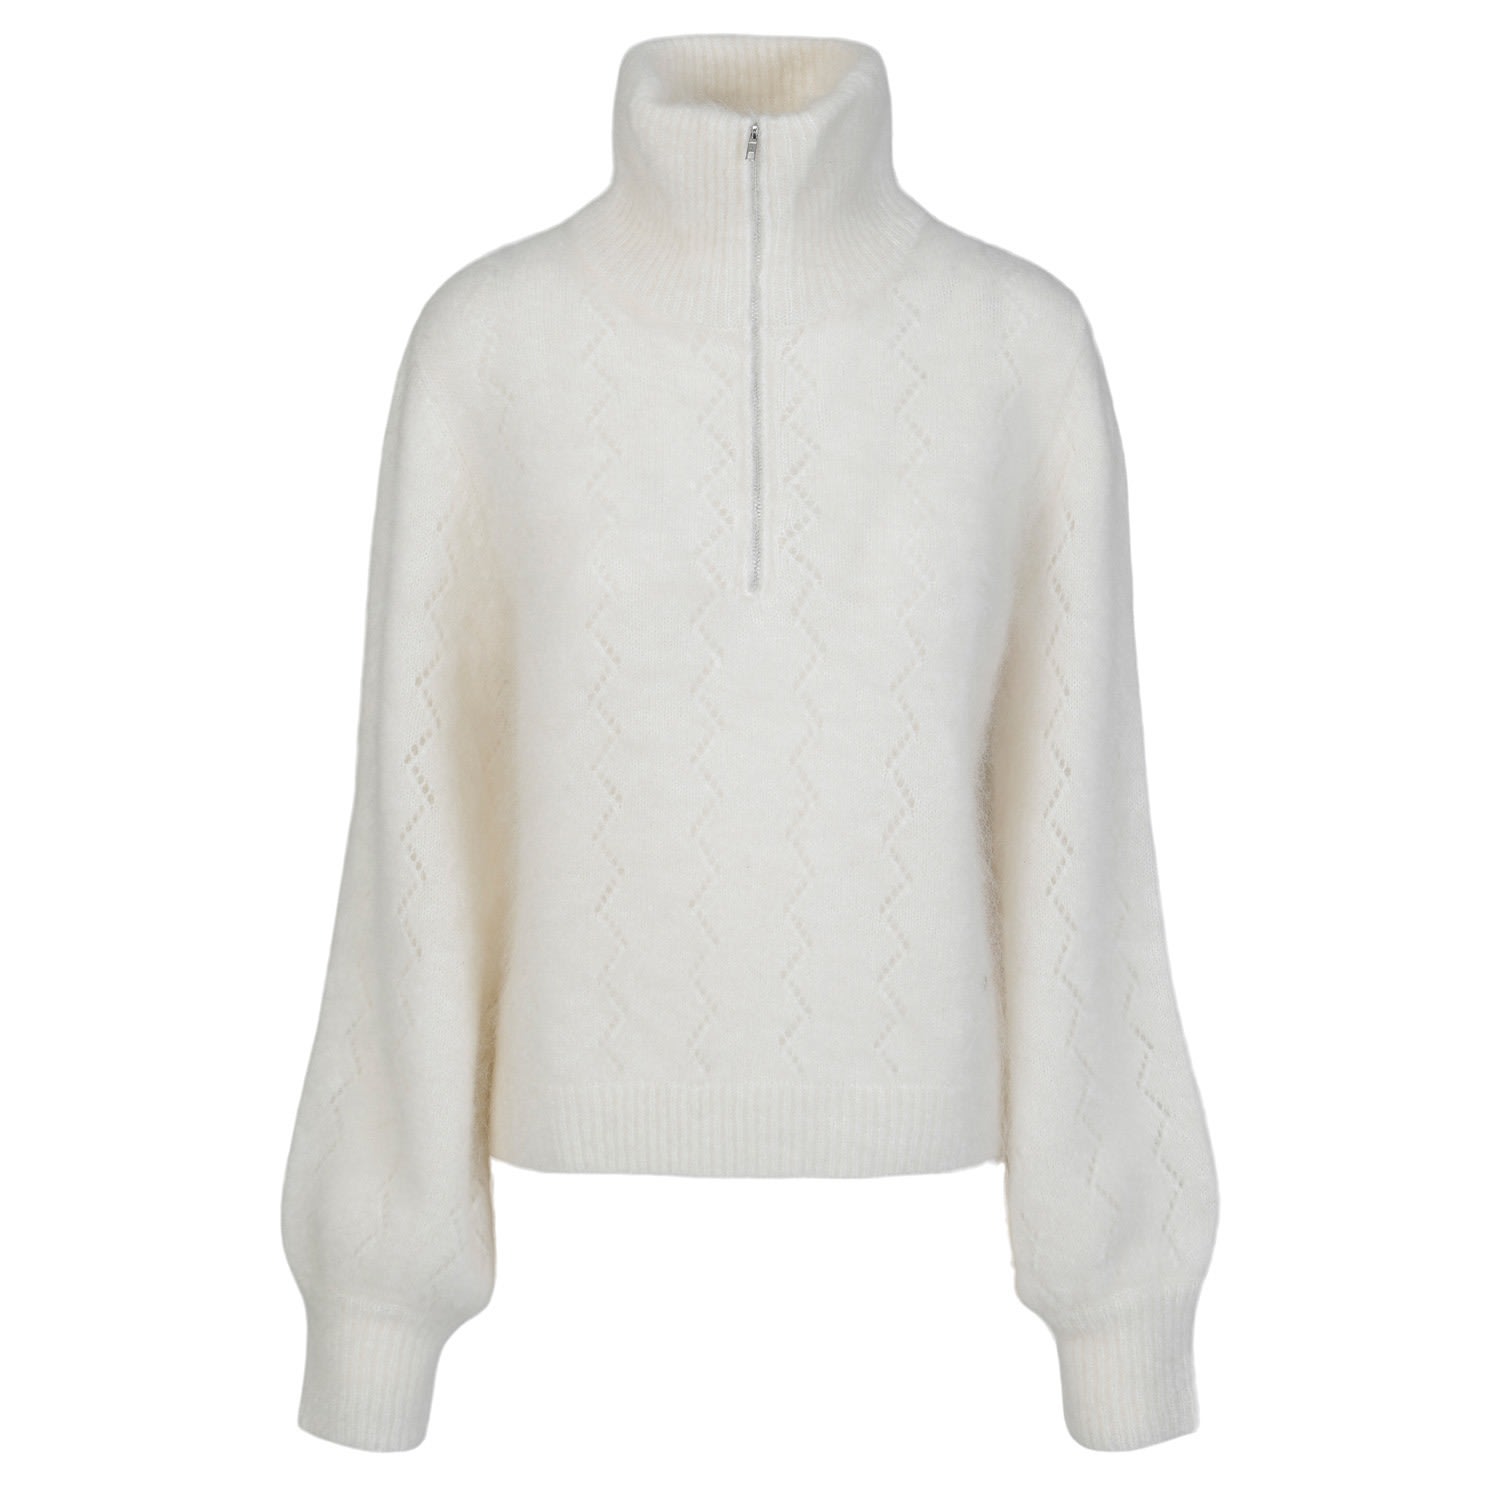 Women’s "Mille" Fluffy Mohair Pullover - White Extra Large Tirillm